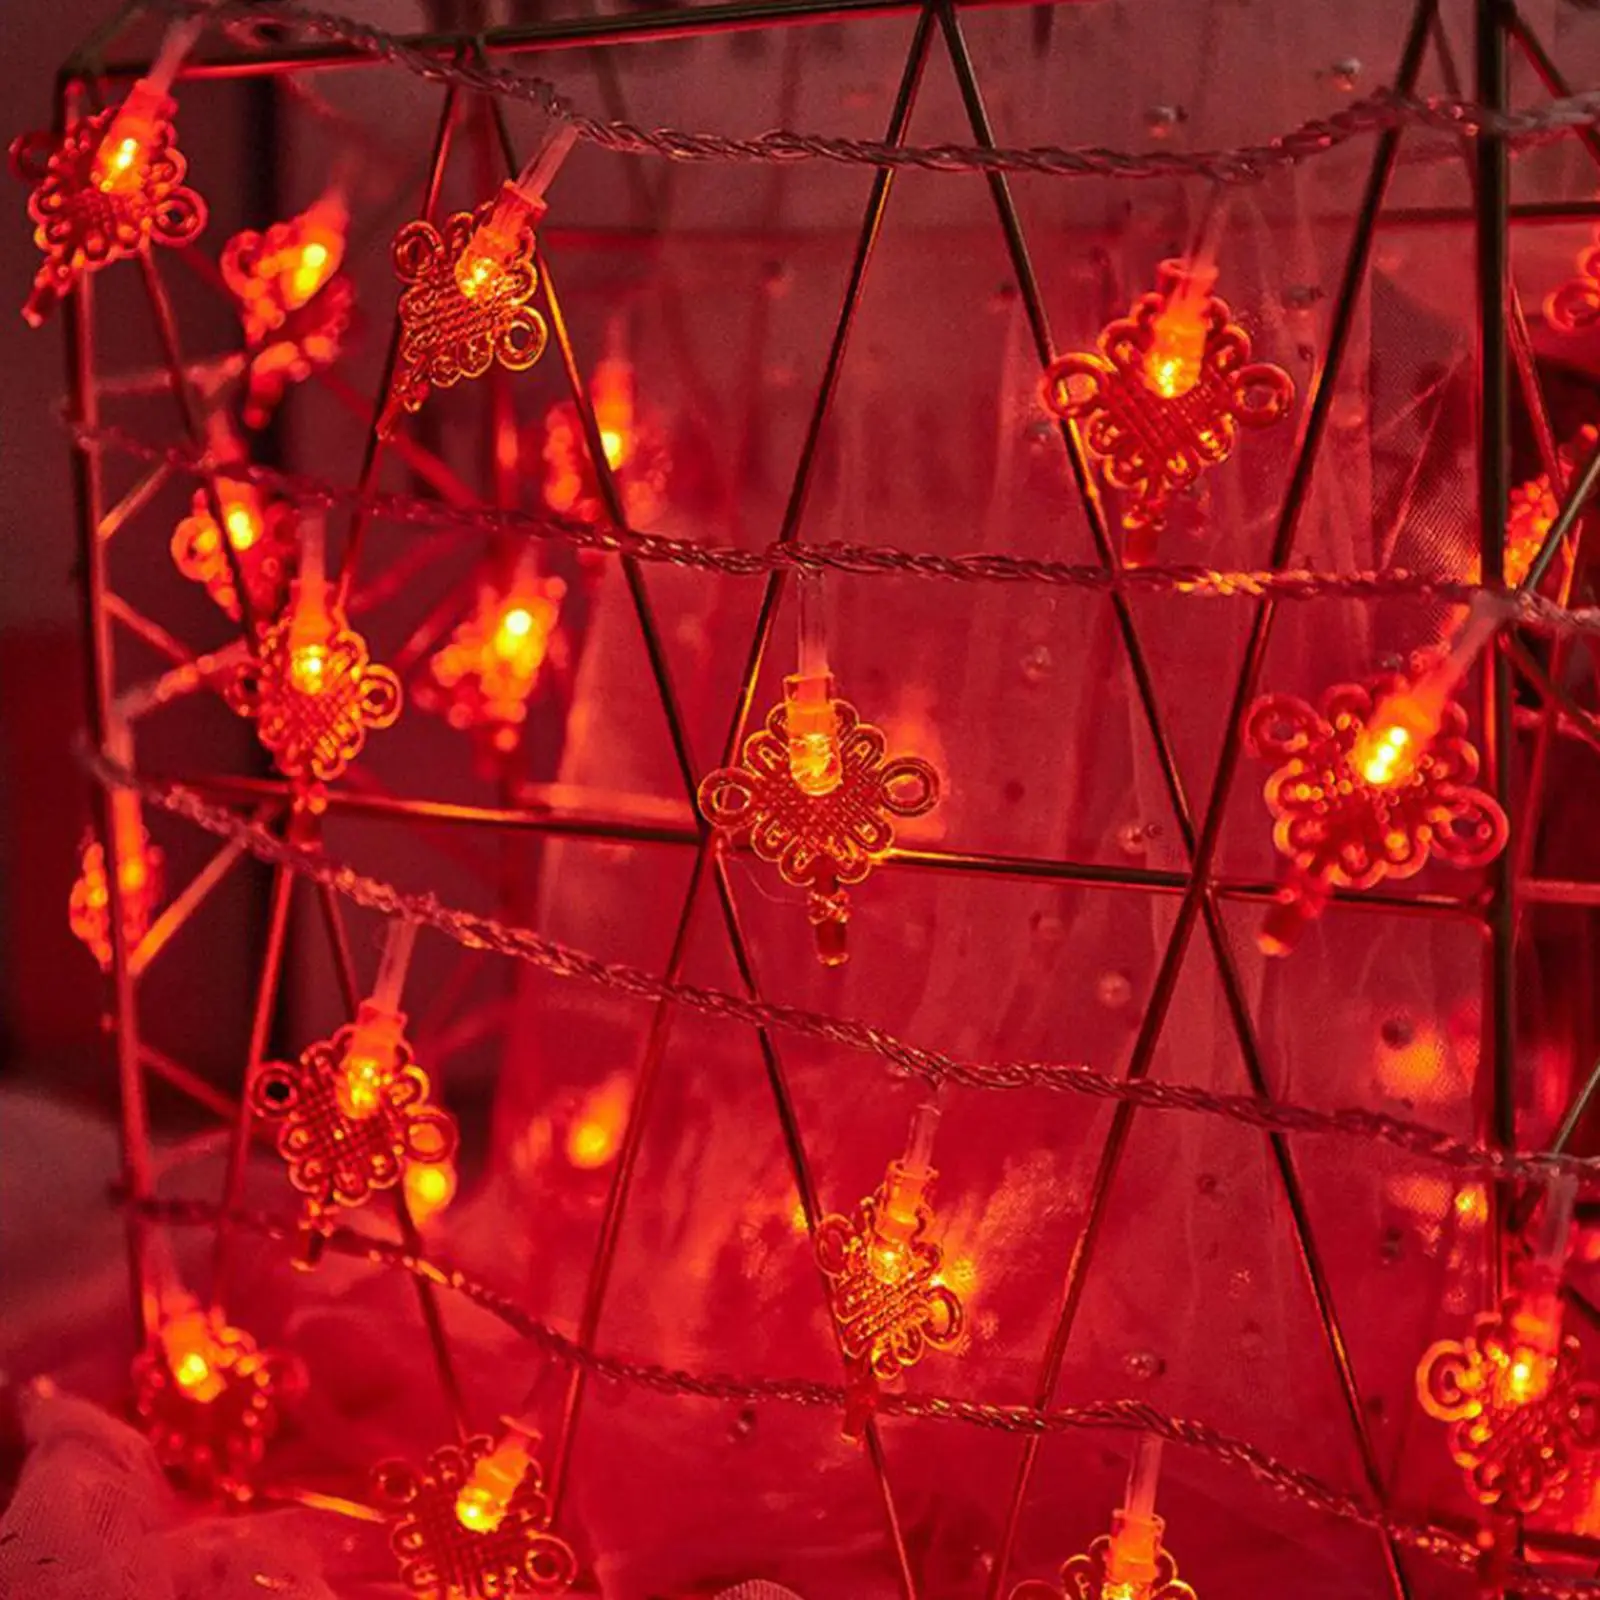 Fairy Light, Chinese New Year Lanterns Lamp, 3 M 20 Lights, Hanging LED String Lights for Home Indoor Outdoor Party Ornament